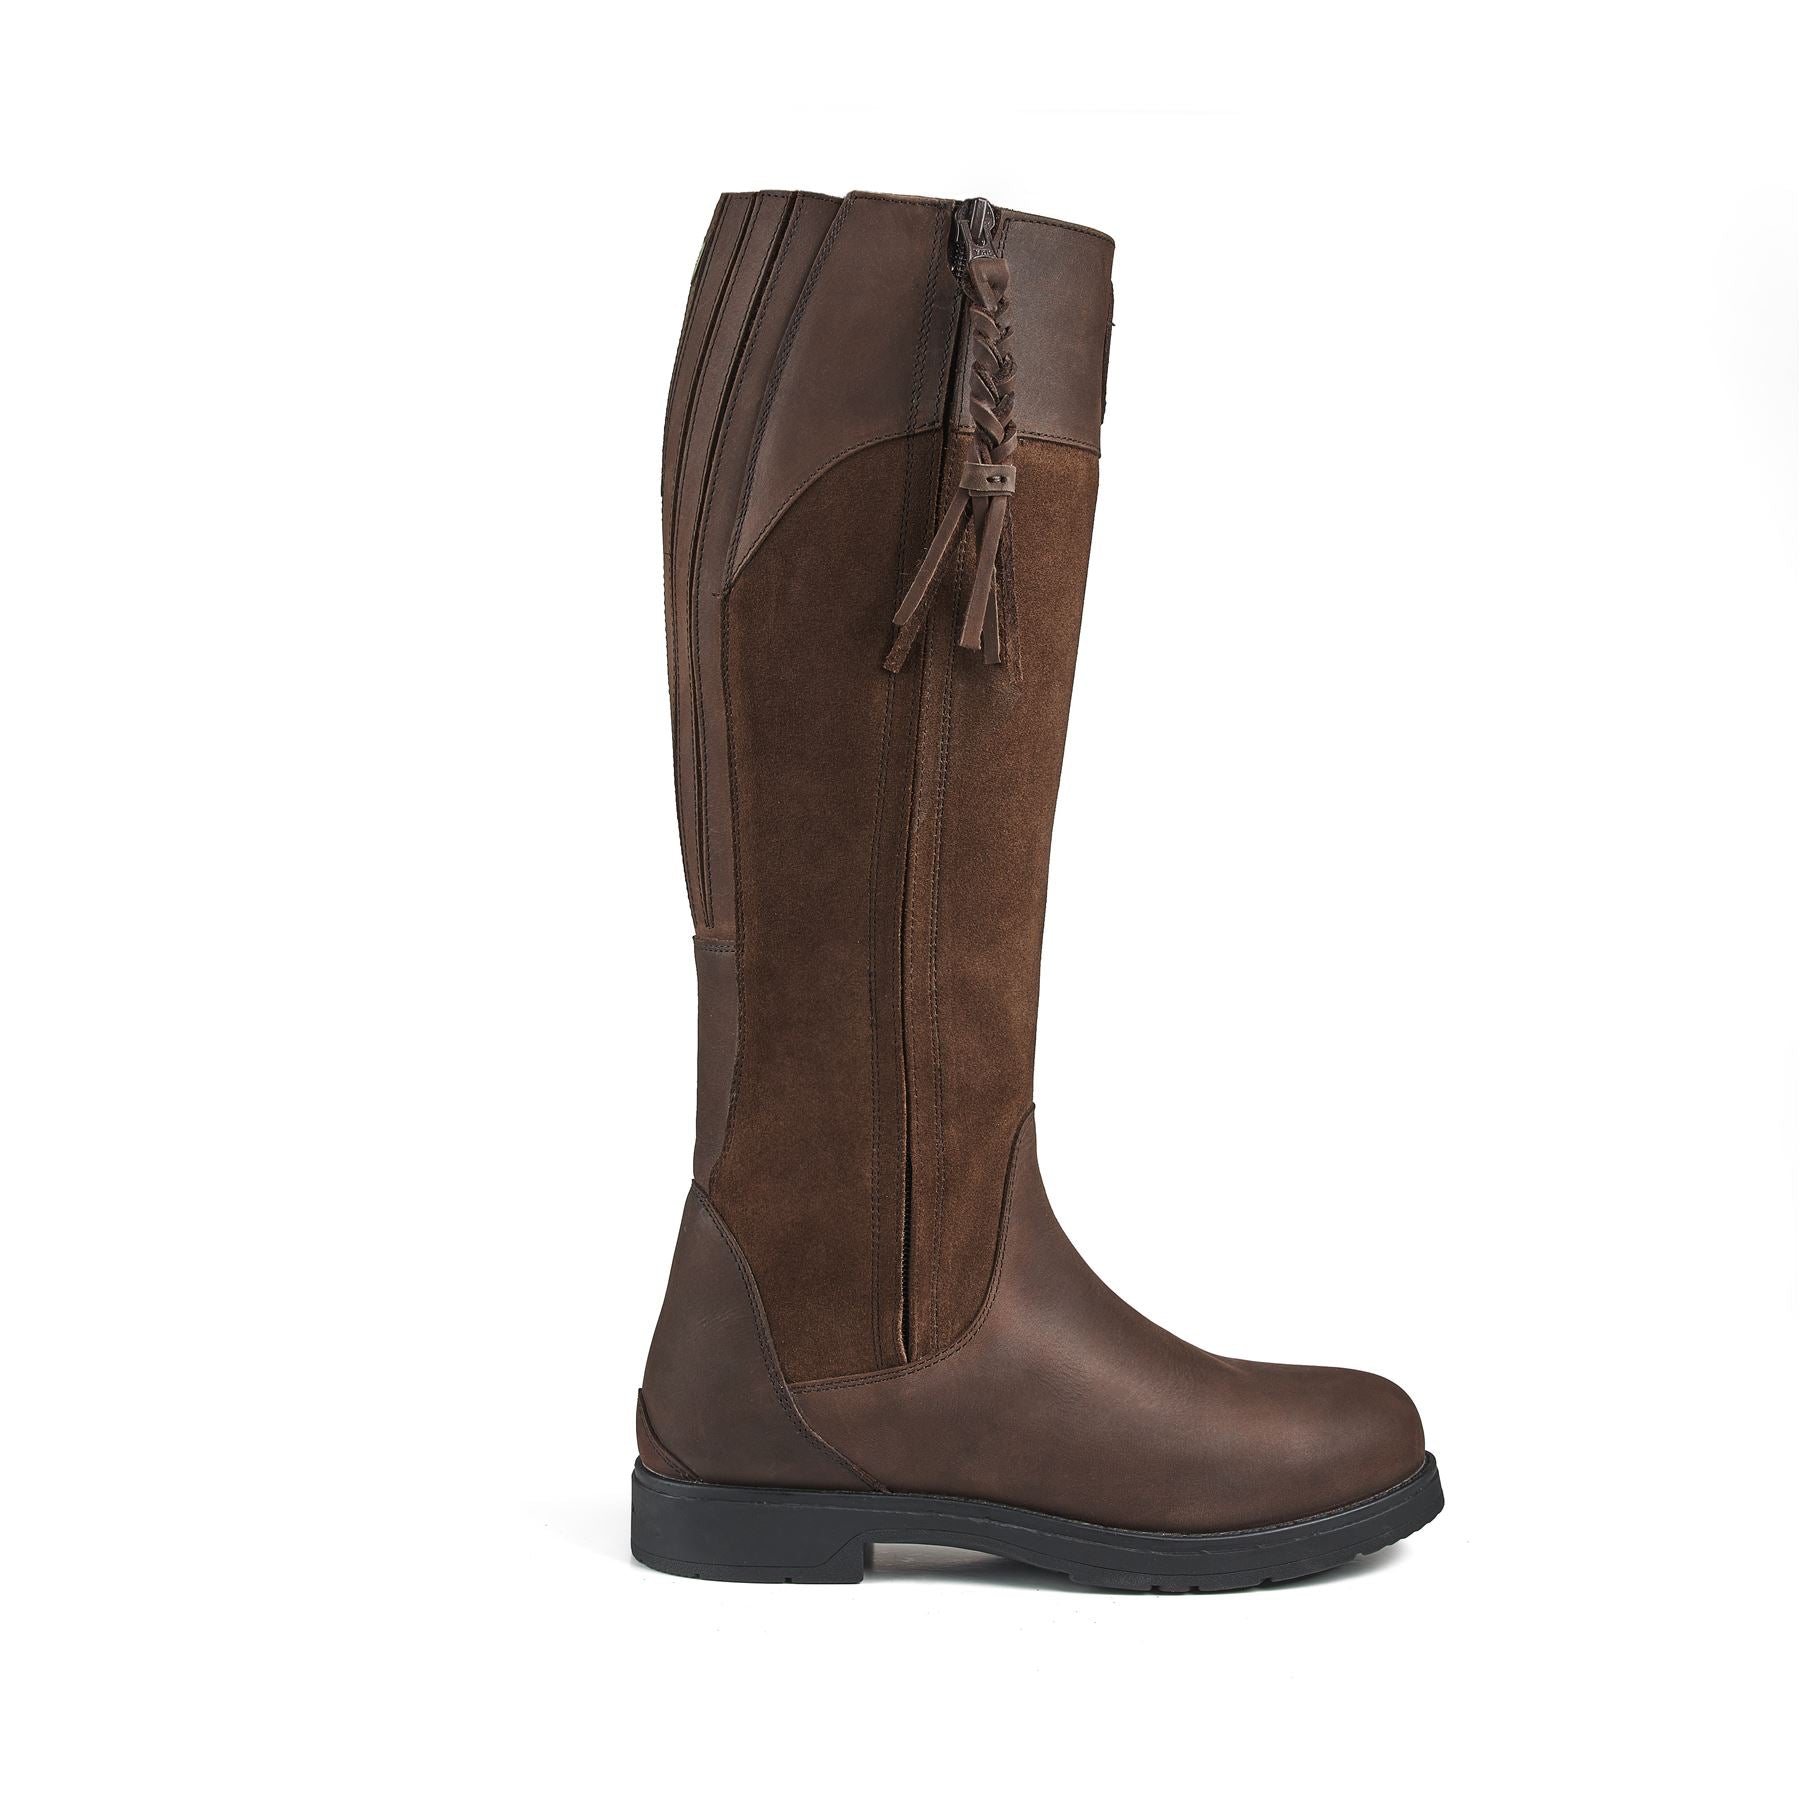 Shires Moretta Varallo Country Boots - Just Horse Riders